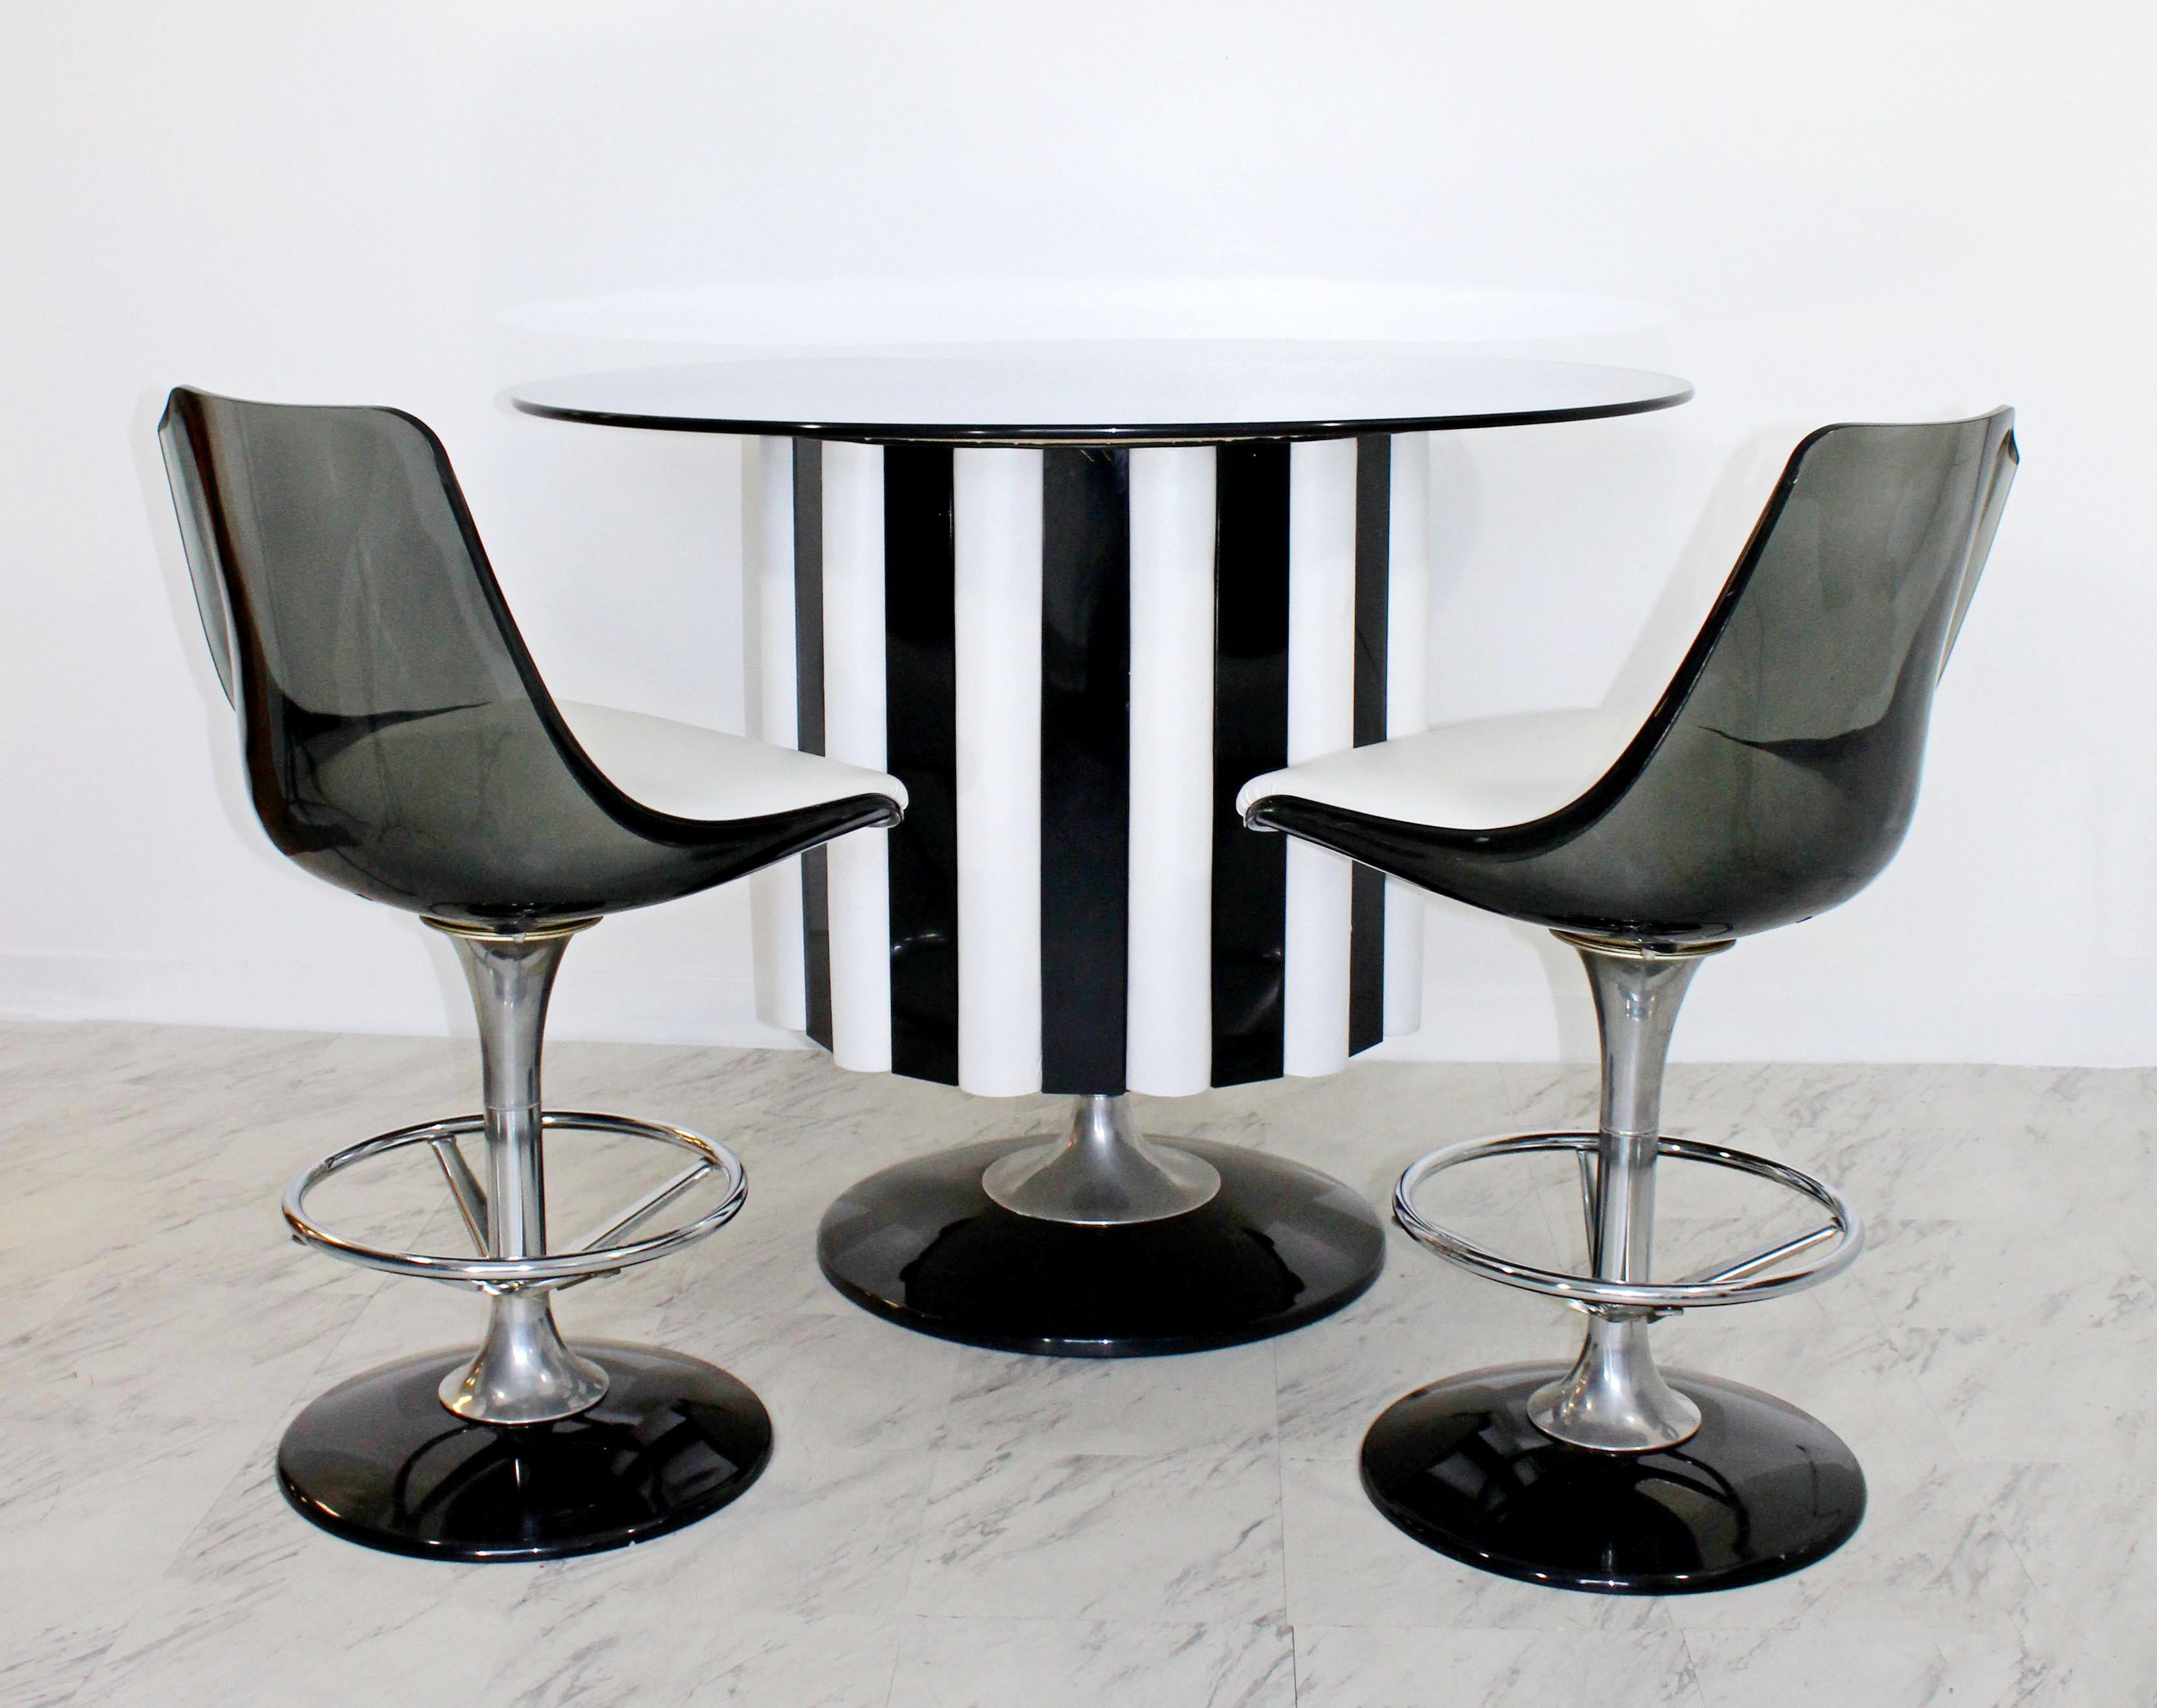 For your consideration is a magnificent dry bar, and pair of matching stools by Chromcraft, circa the 1970s. The bar is made of chrome & vinyl, with a smoked glass, kidney shaped top, and the chairs are chrome & smoked lucite. In very good